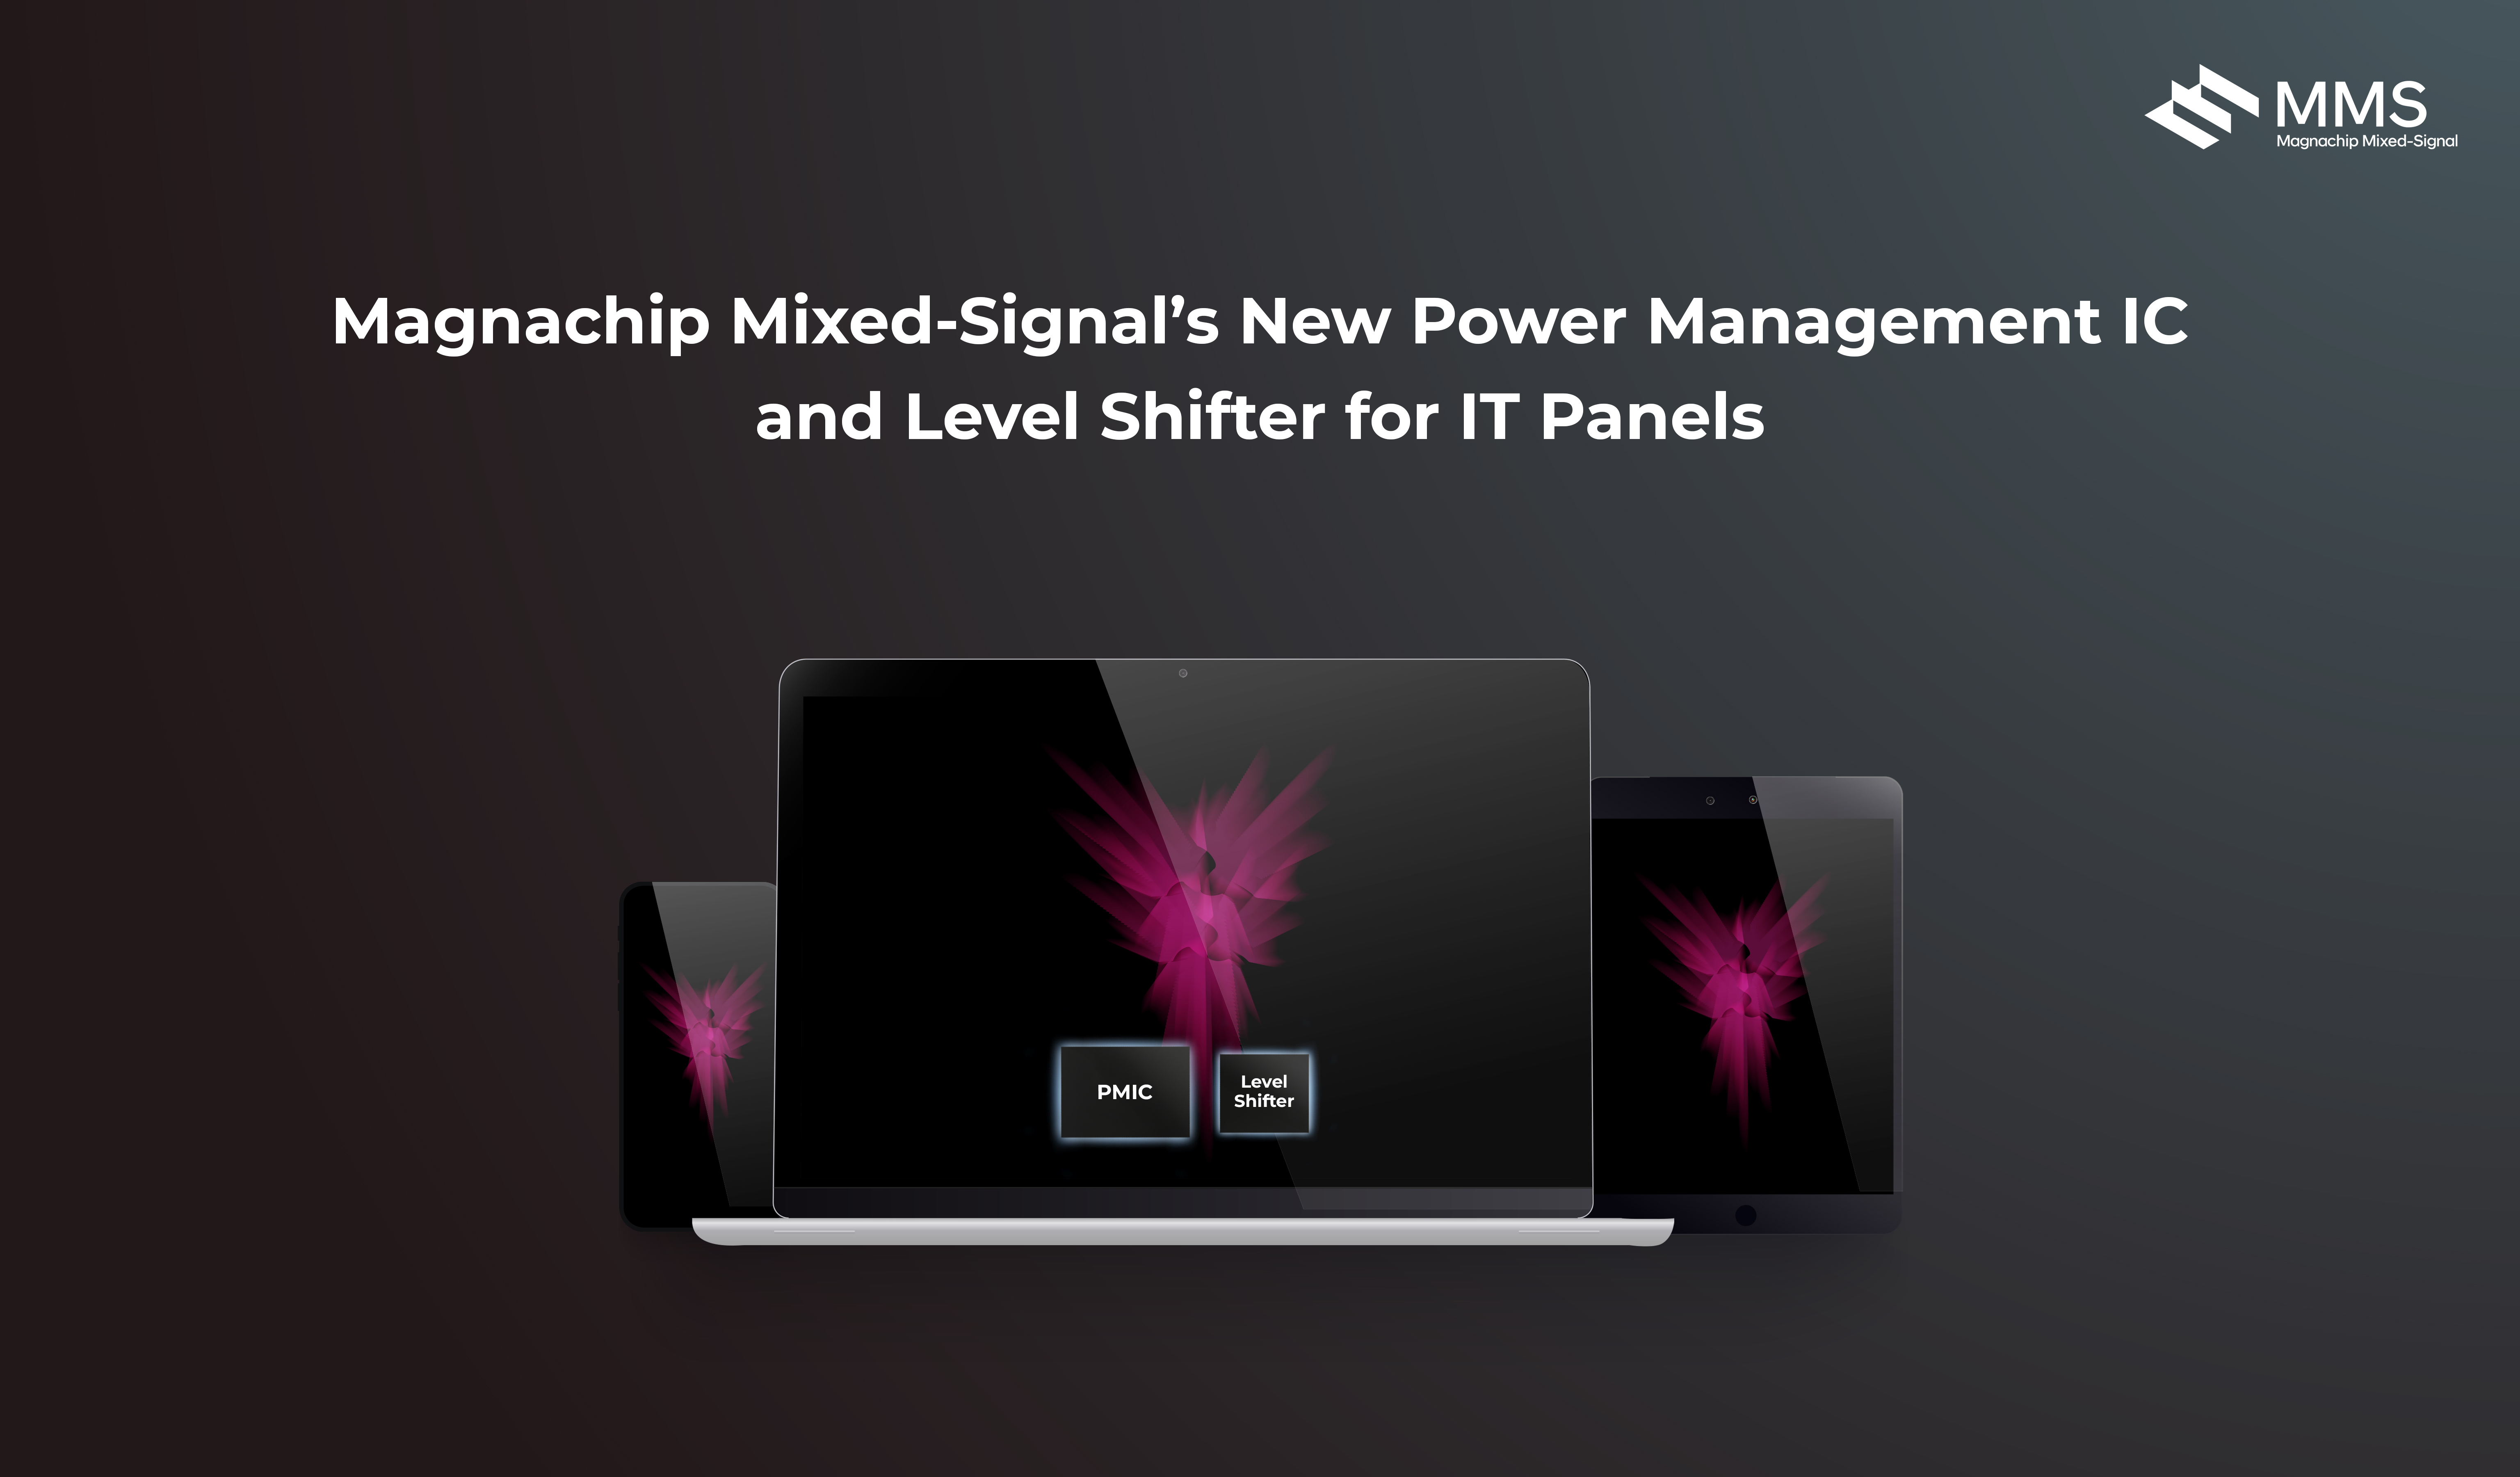 Magnachip Mixed-Signal's New Power Management IC and Level Shifter for IT Panels_word_en